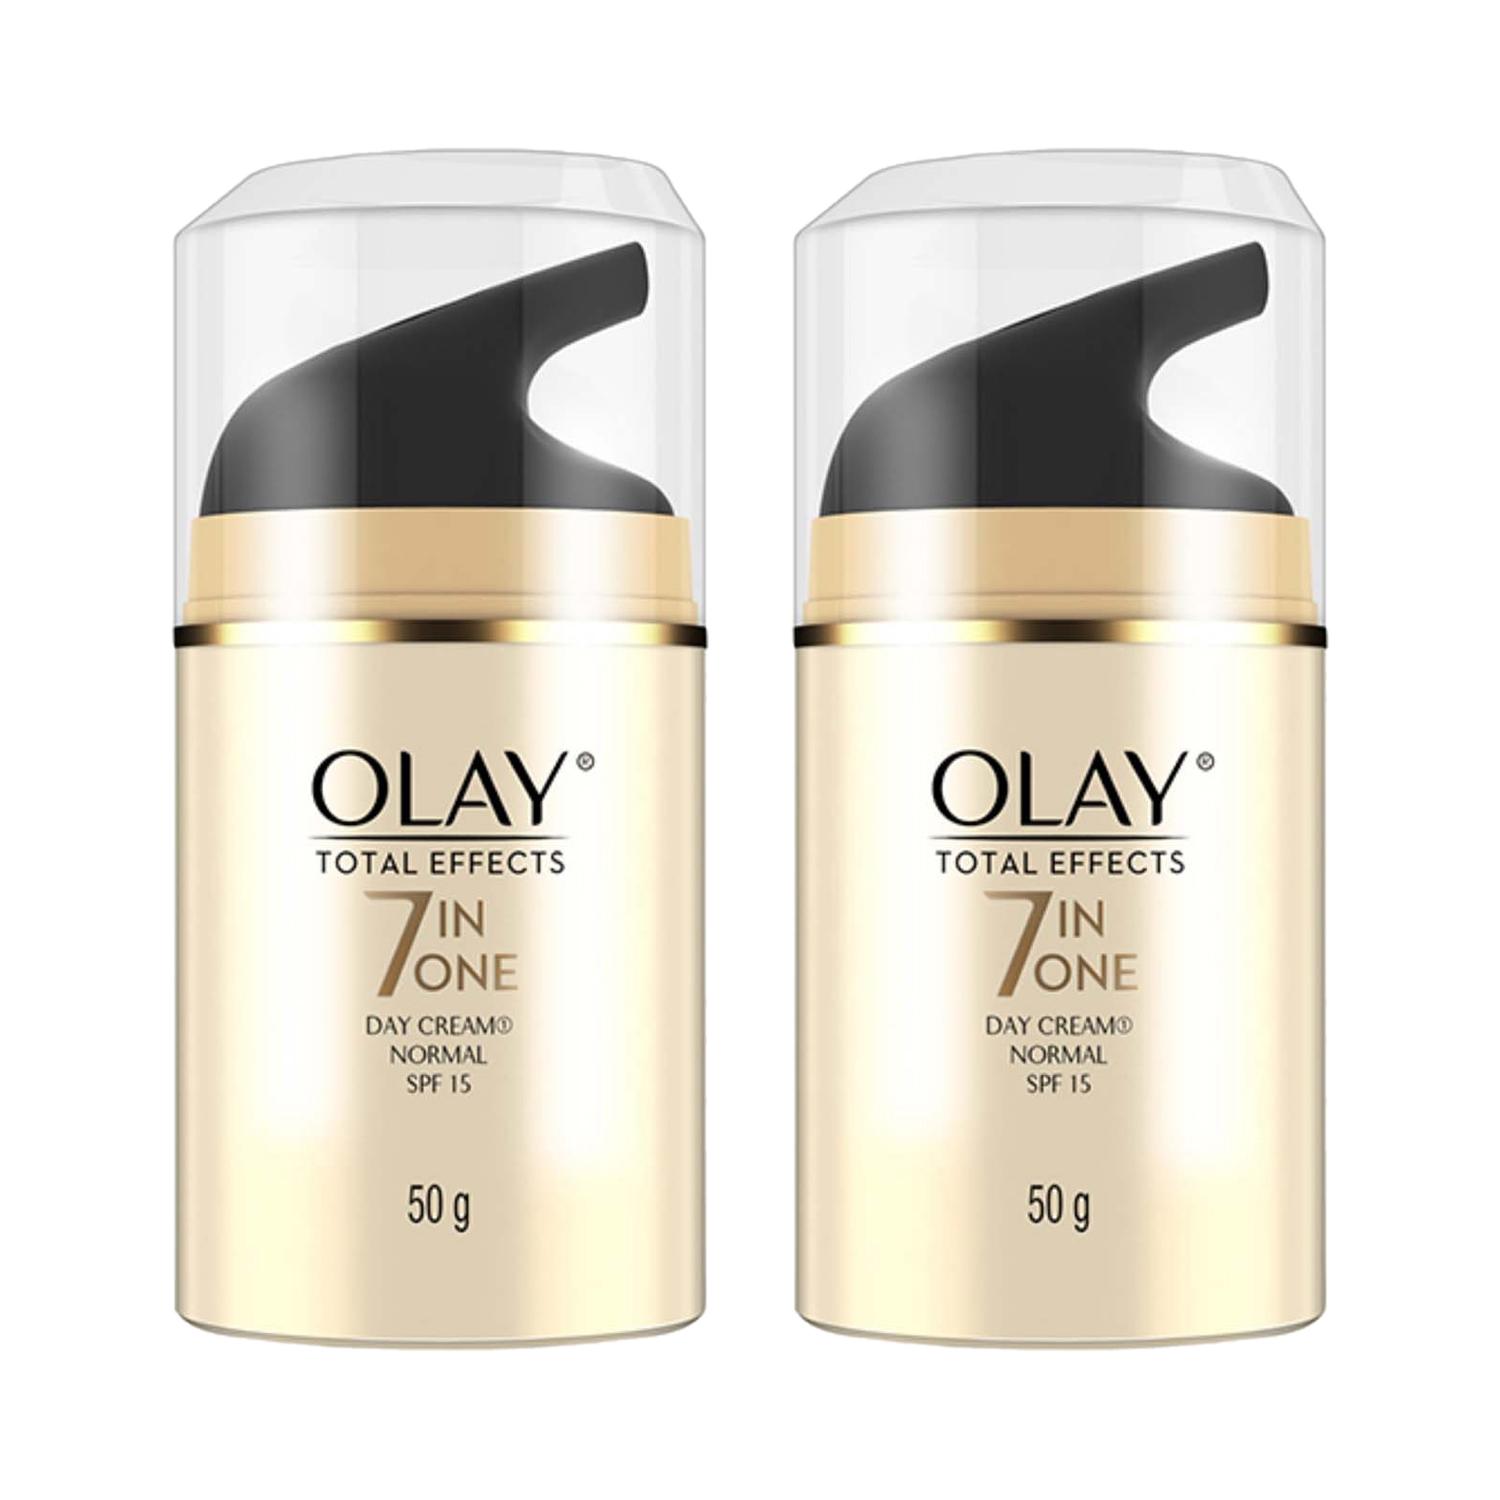 Olay | Olay 7-In-1 Total Effects Anti Ageing Day Cream Spf 15 (50g) (Pack Of 2) Combo